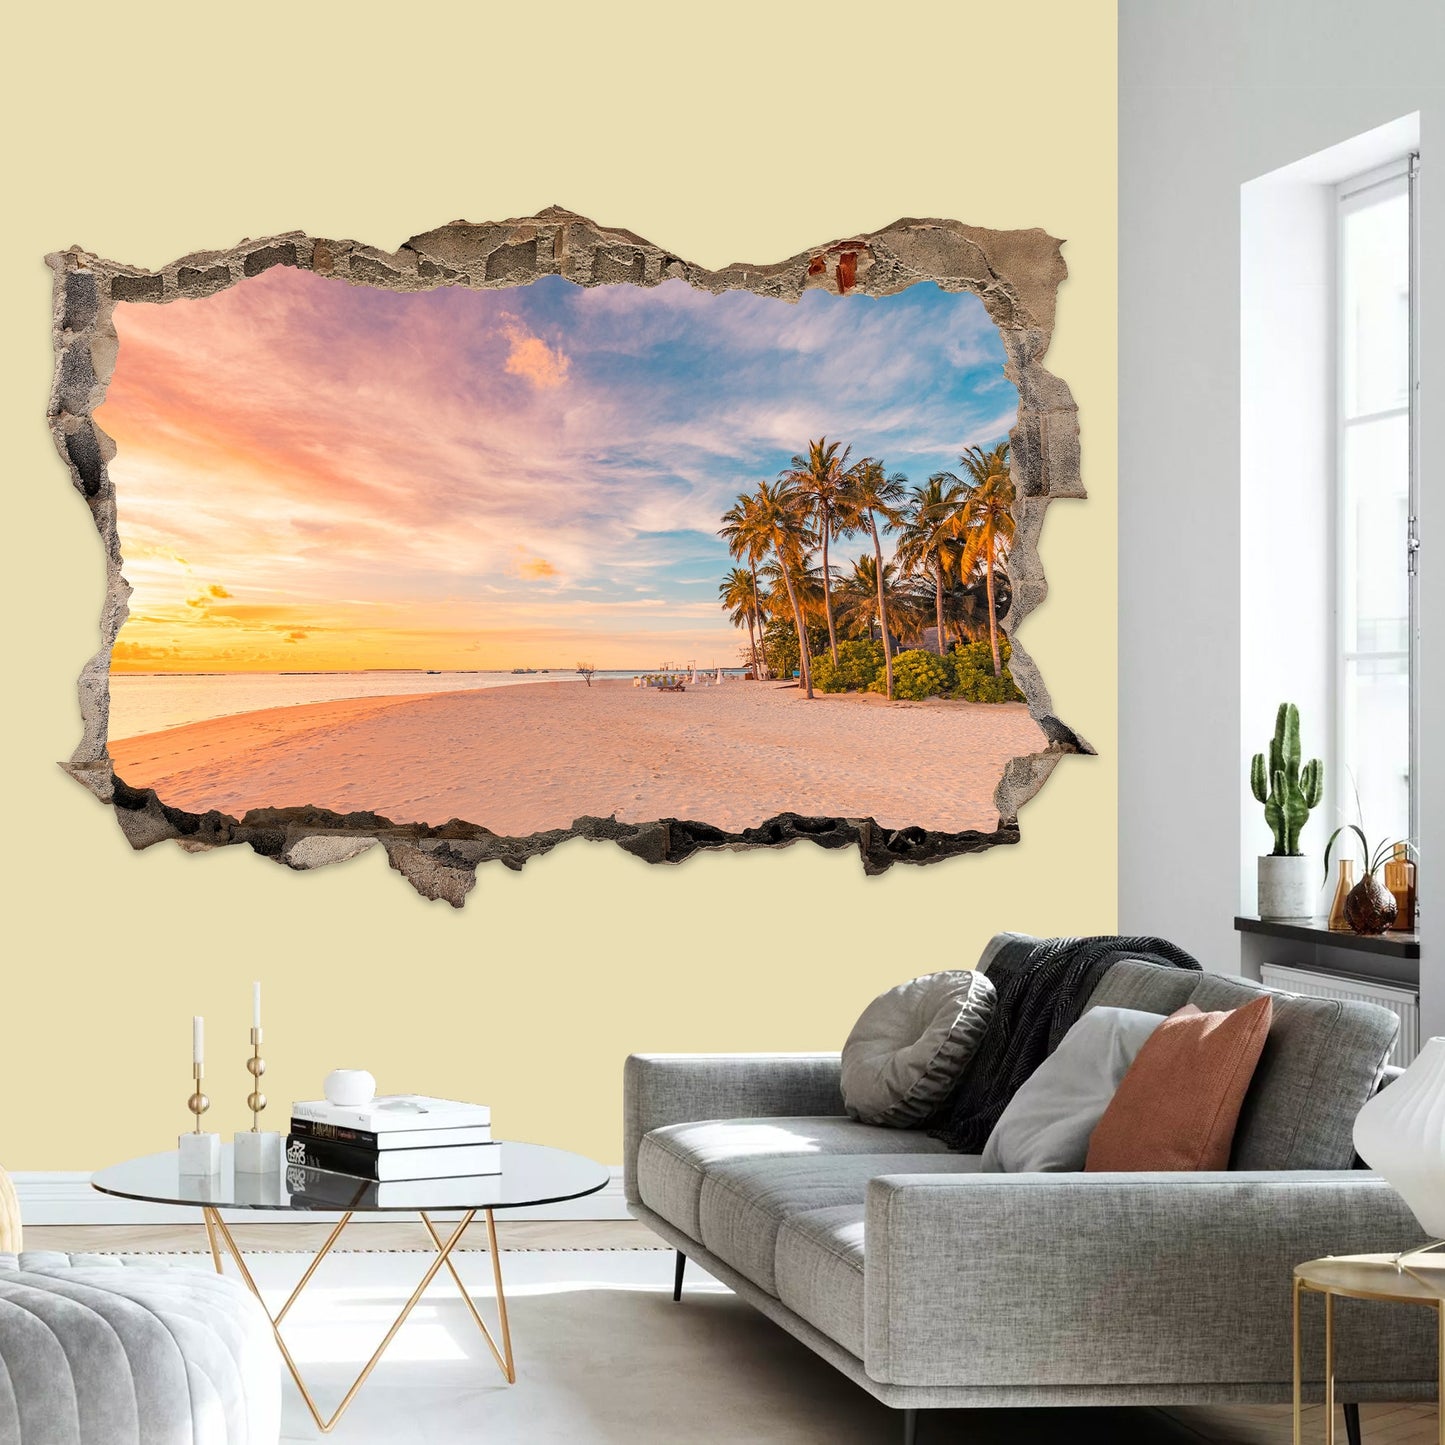 3D Ocean Sunset Wall Decal - Stunning Beach View Through Realistic Cracked Wall, Tropical Palm Trees, and Azure Seascape - BW015